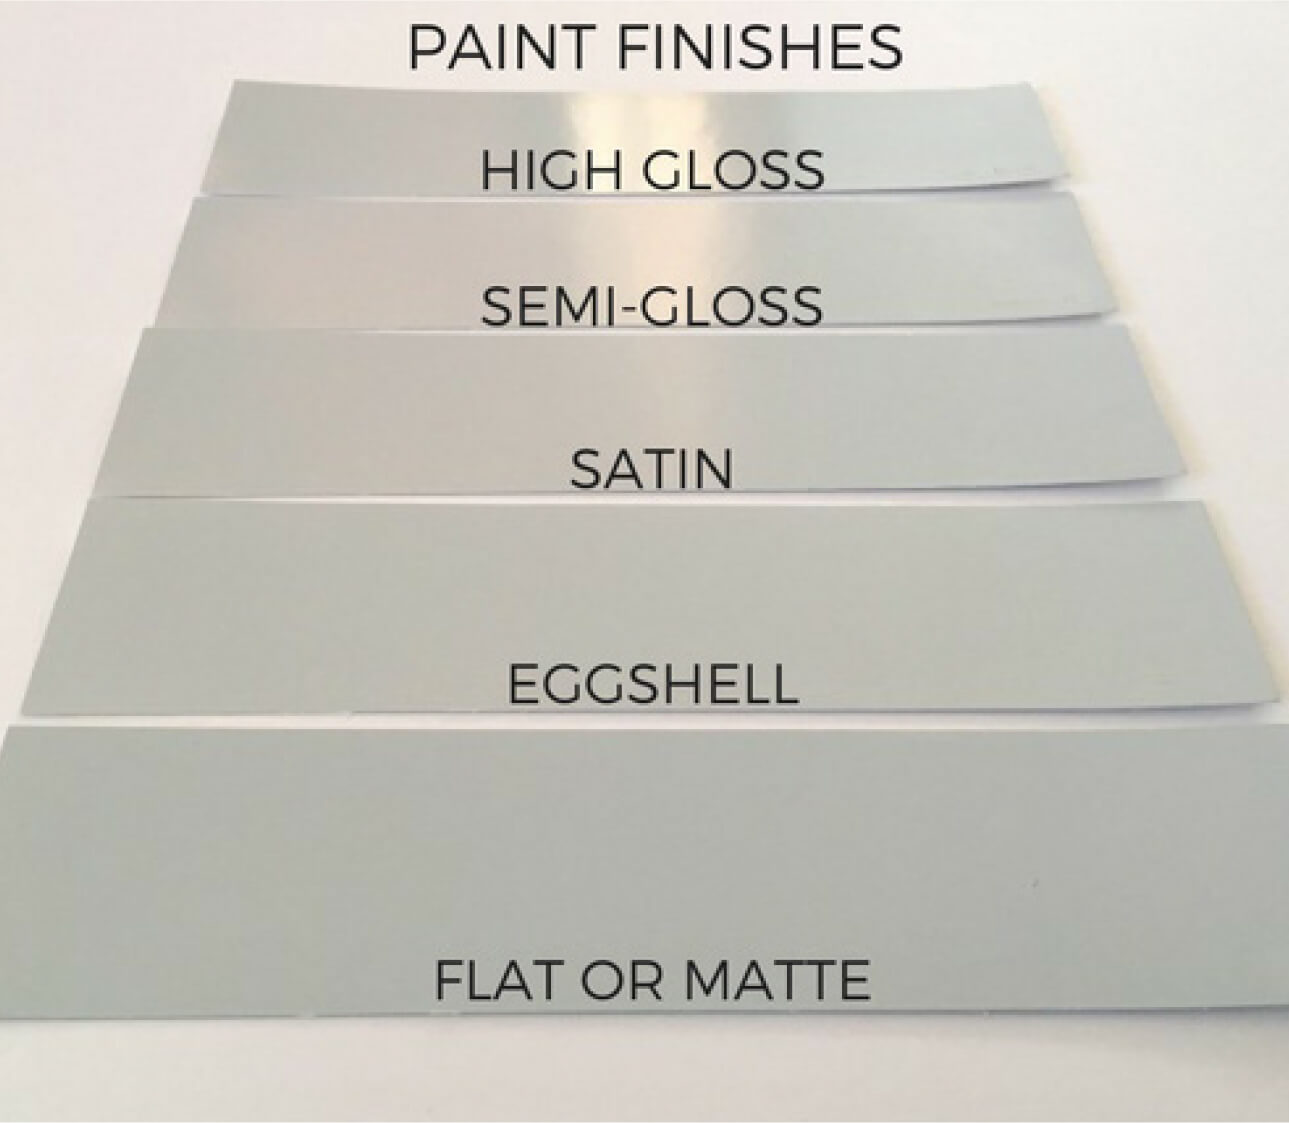 Samples of Paint finishes